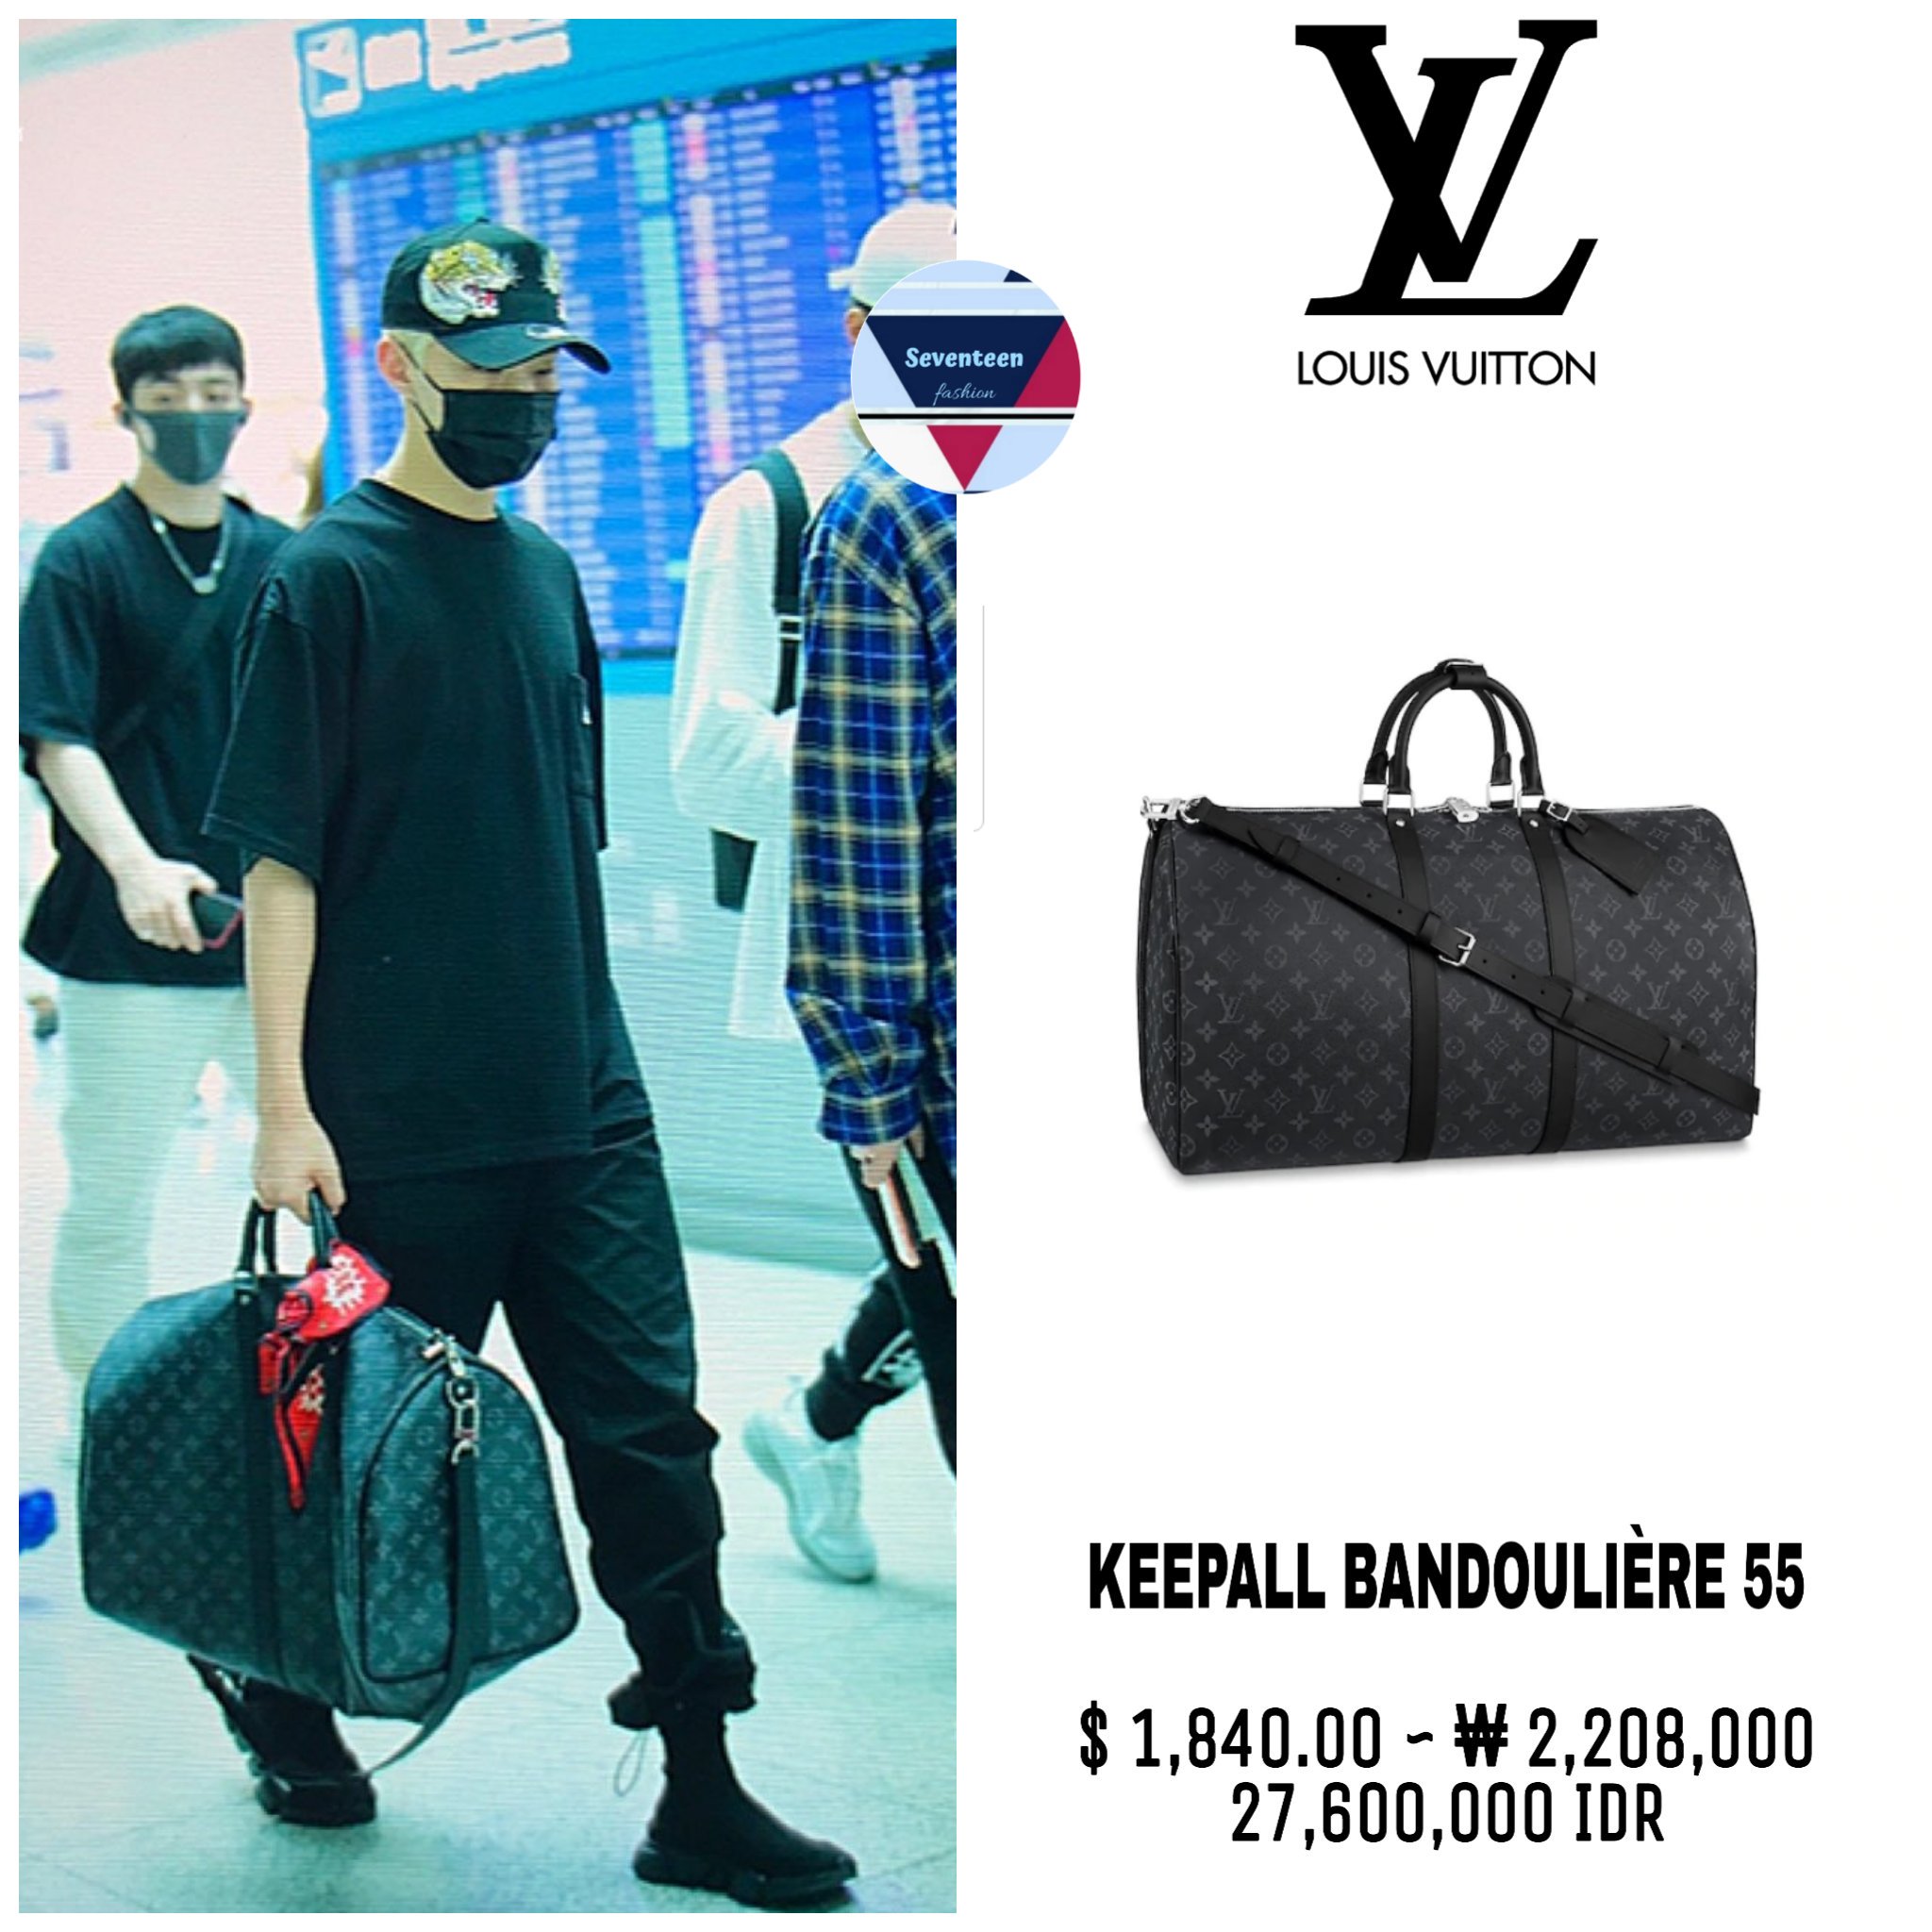 CL style on X: [220819] CL Weverse update at Incheon airport on the way to  Osaka, Japan •luggage : #LOUISVUITTON horizon 50 •bag: #LOUISVUITTION  keepall bag limited edition graffiti #CL #씨엘 @chaelinCL